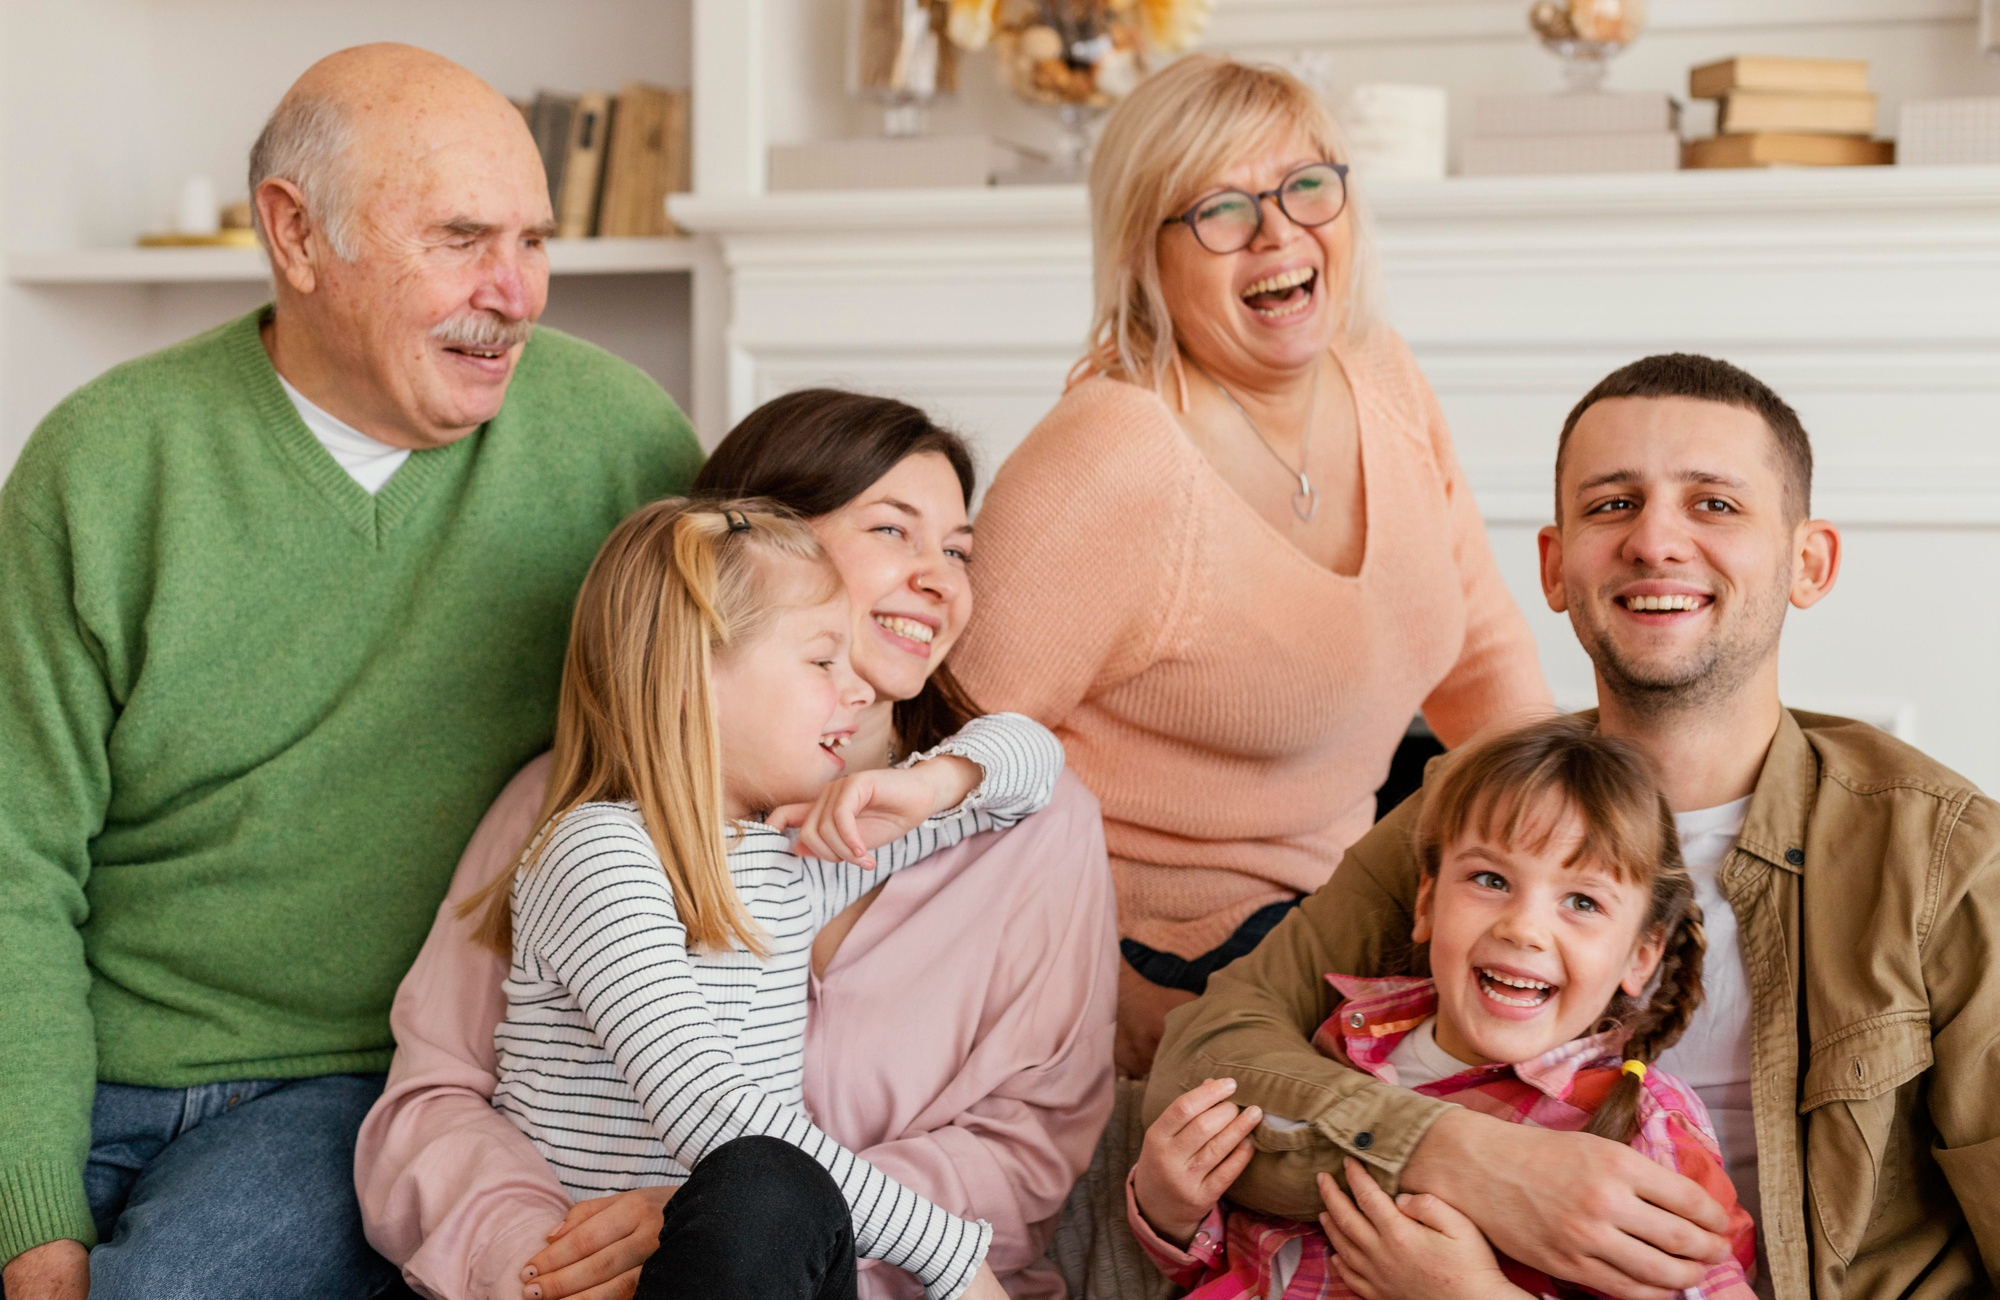 A happy family including grandparents, adults children, and grandkids | Source: Freepik